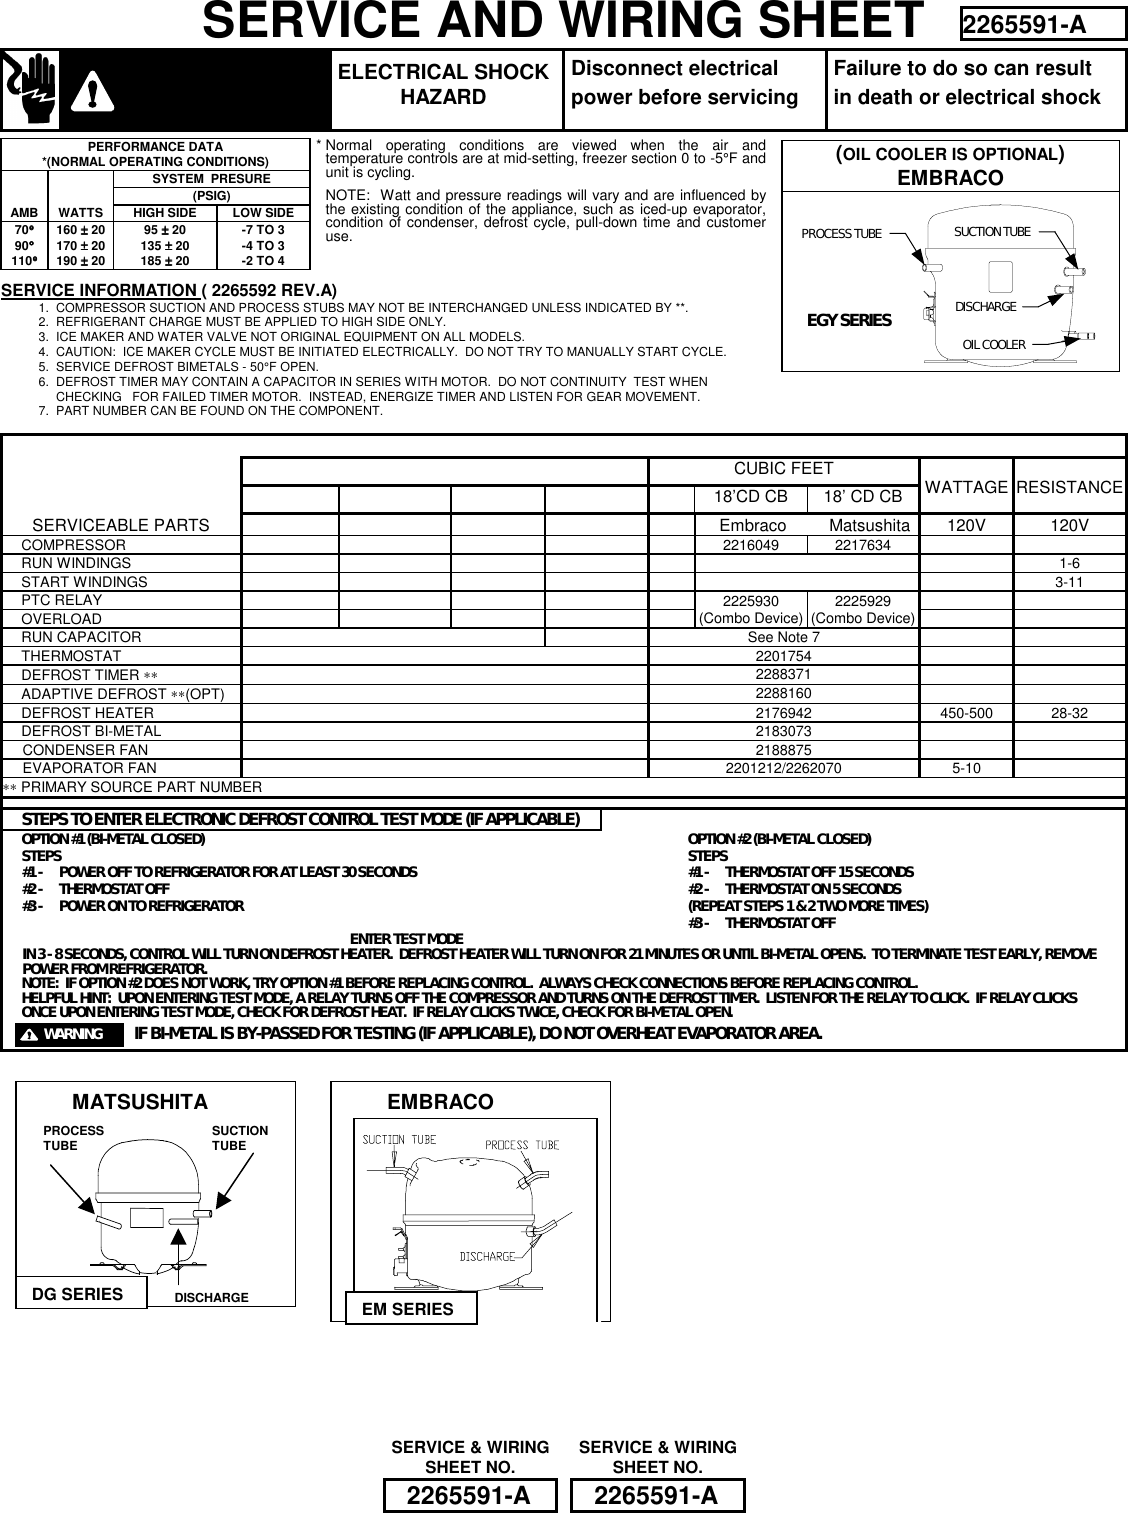 Page 1 of 2 - SERVICE AND WIRING SHEET  Amana Refrigerator 2265591-A